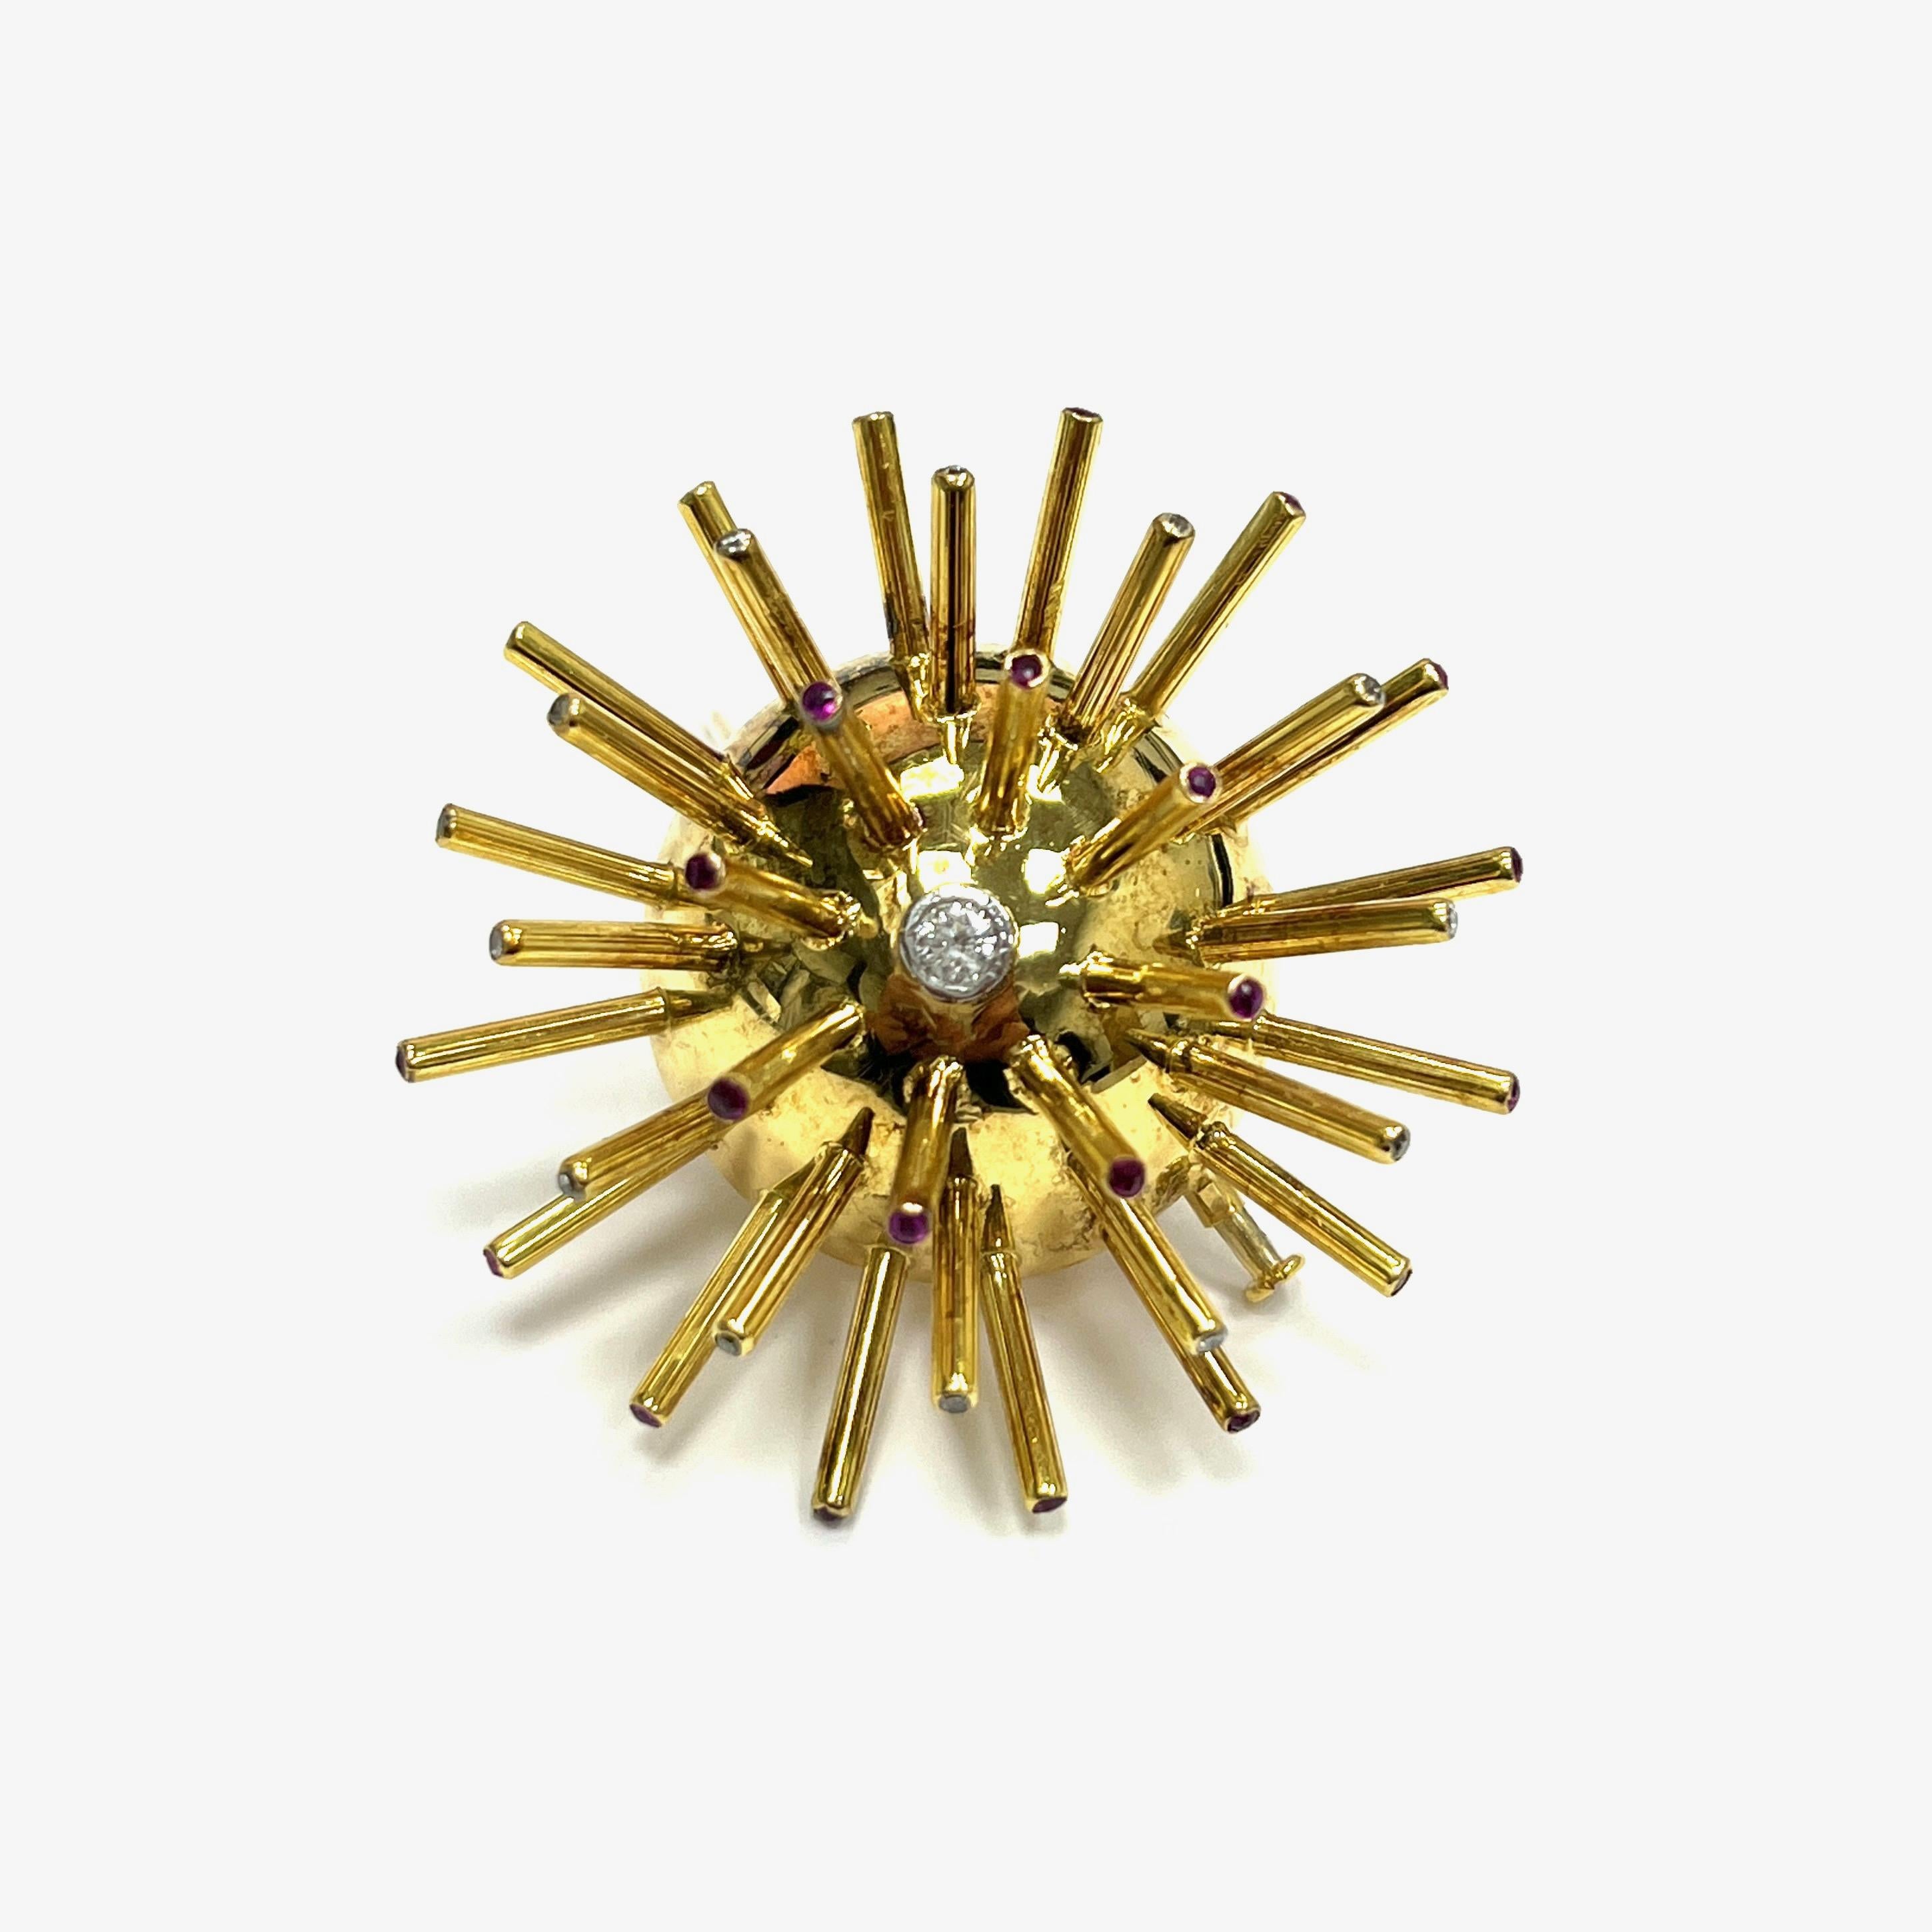 Sputnik diamond ruby yellow gold brooch

This brooch's design was inspired by Sputnik, the very first satellite that orbited the Earth. The end of each spike features a round-cut diamond or ruby, with a single main diamond at the ball's center. Made